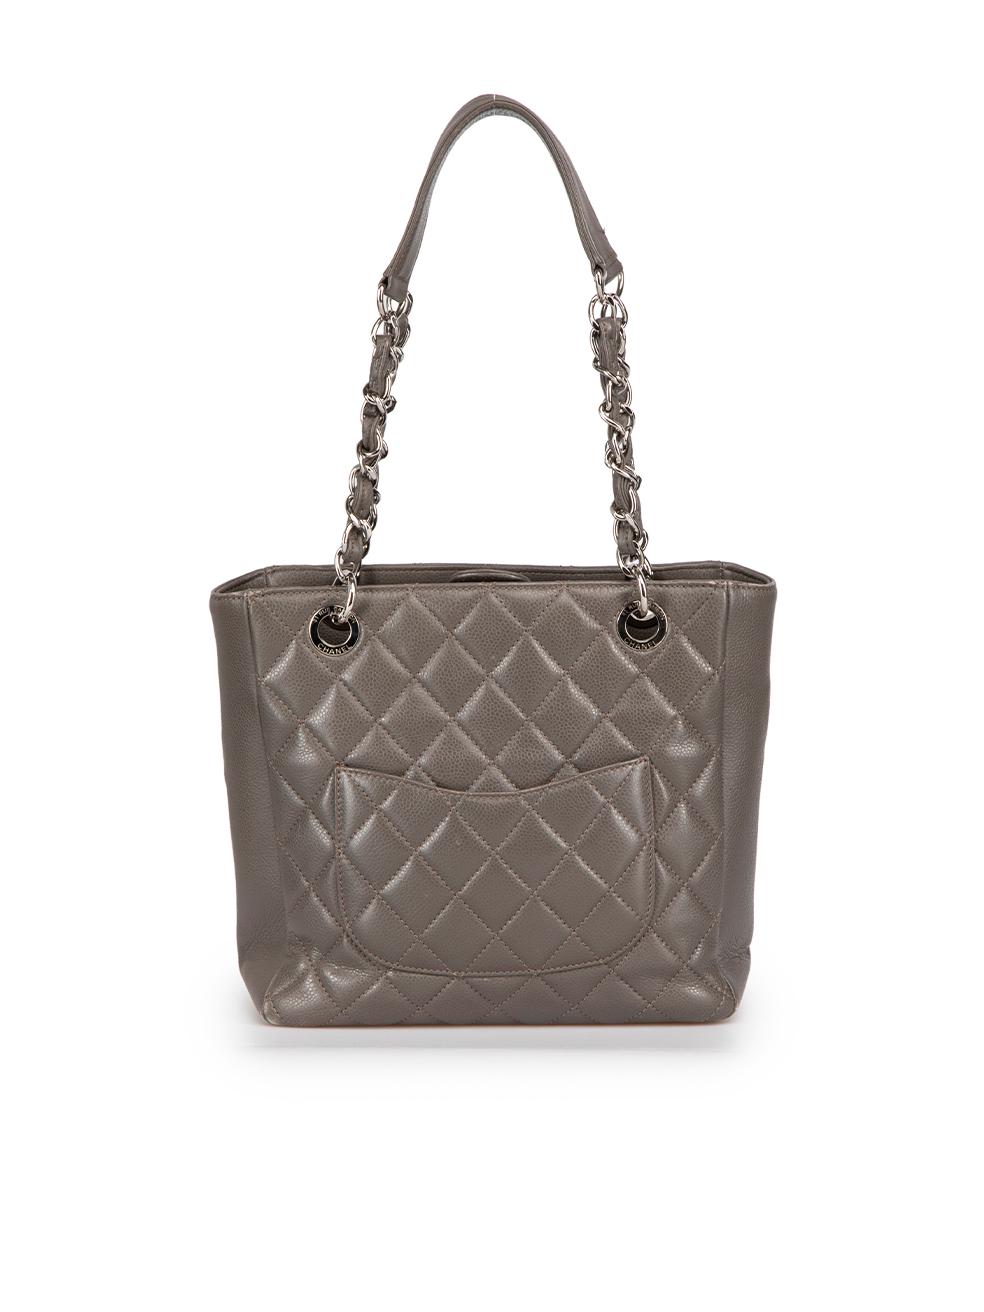 Gray Chanel Grey Caviar Leather Petite Shopping Tote